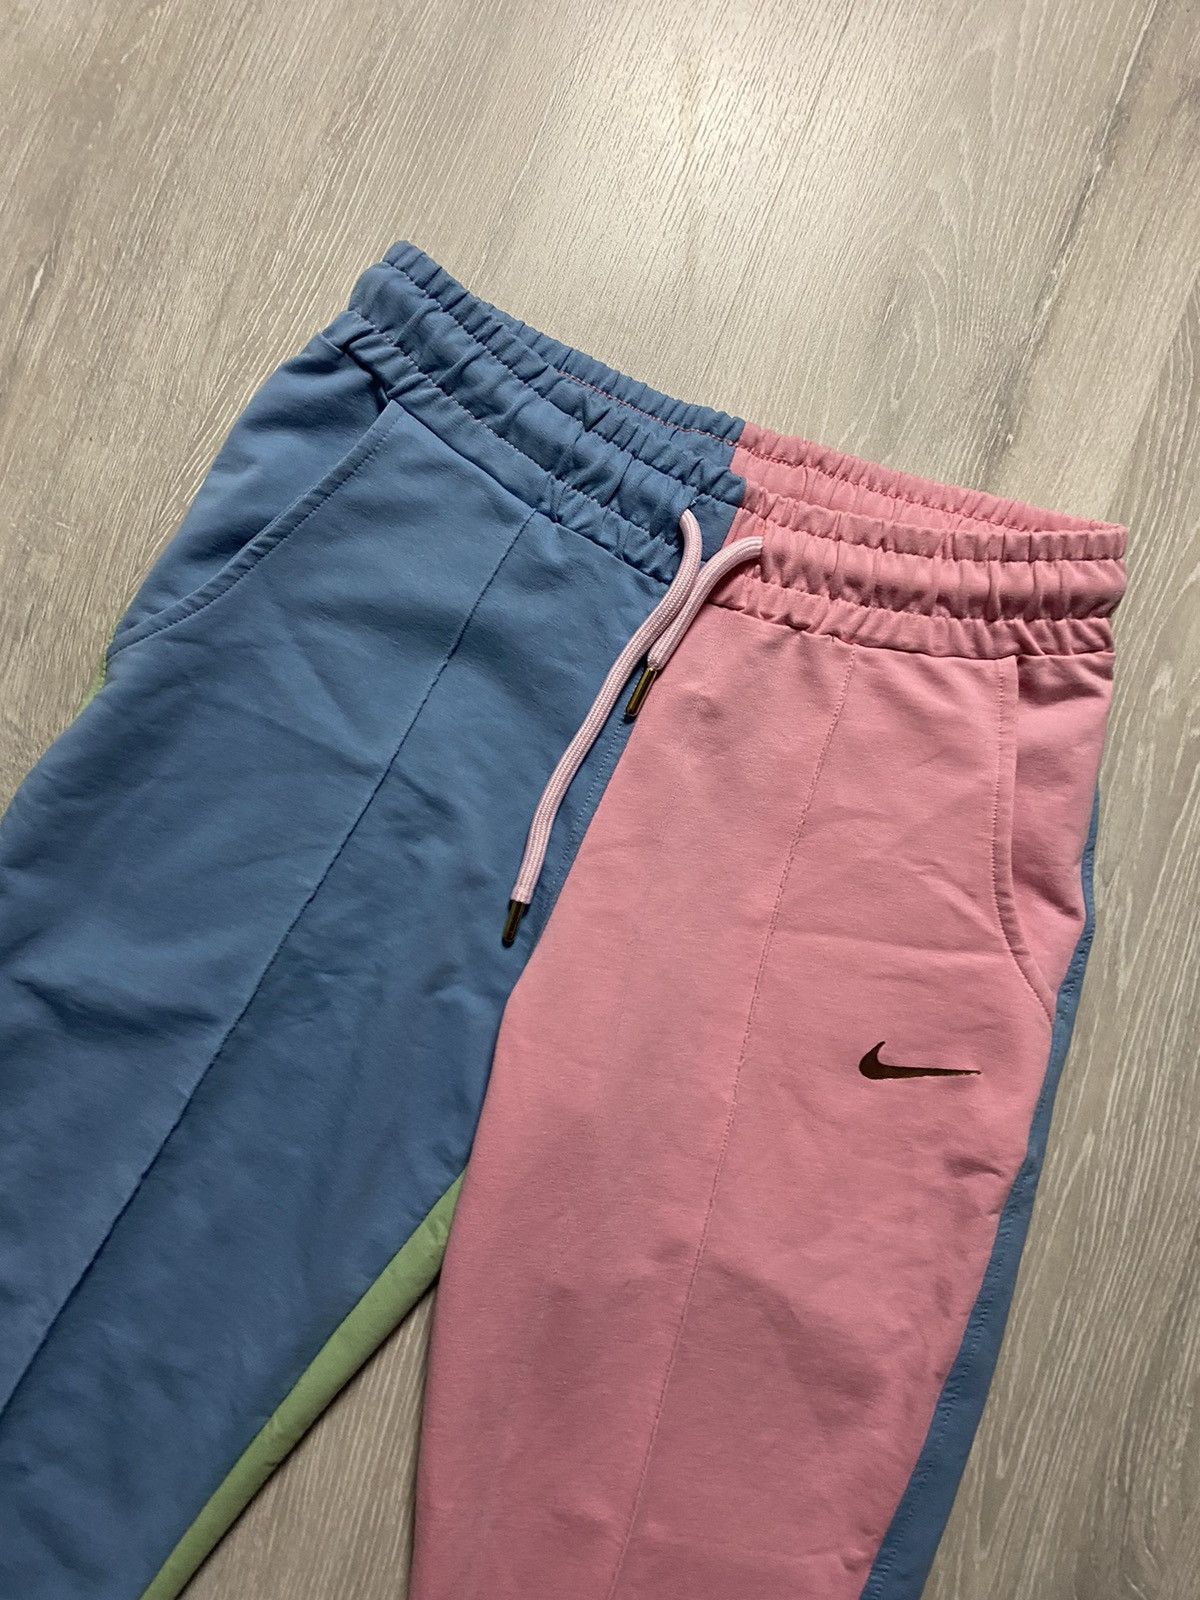 Nike Nike pink blue green sweatpants small swoosh Size 30" / US 8 / IT 44 - 2 Preview